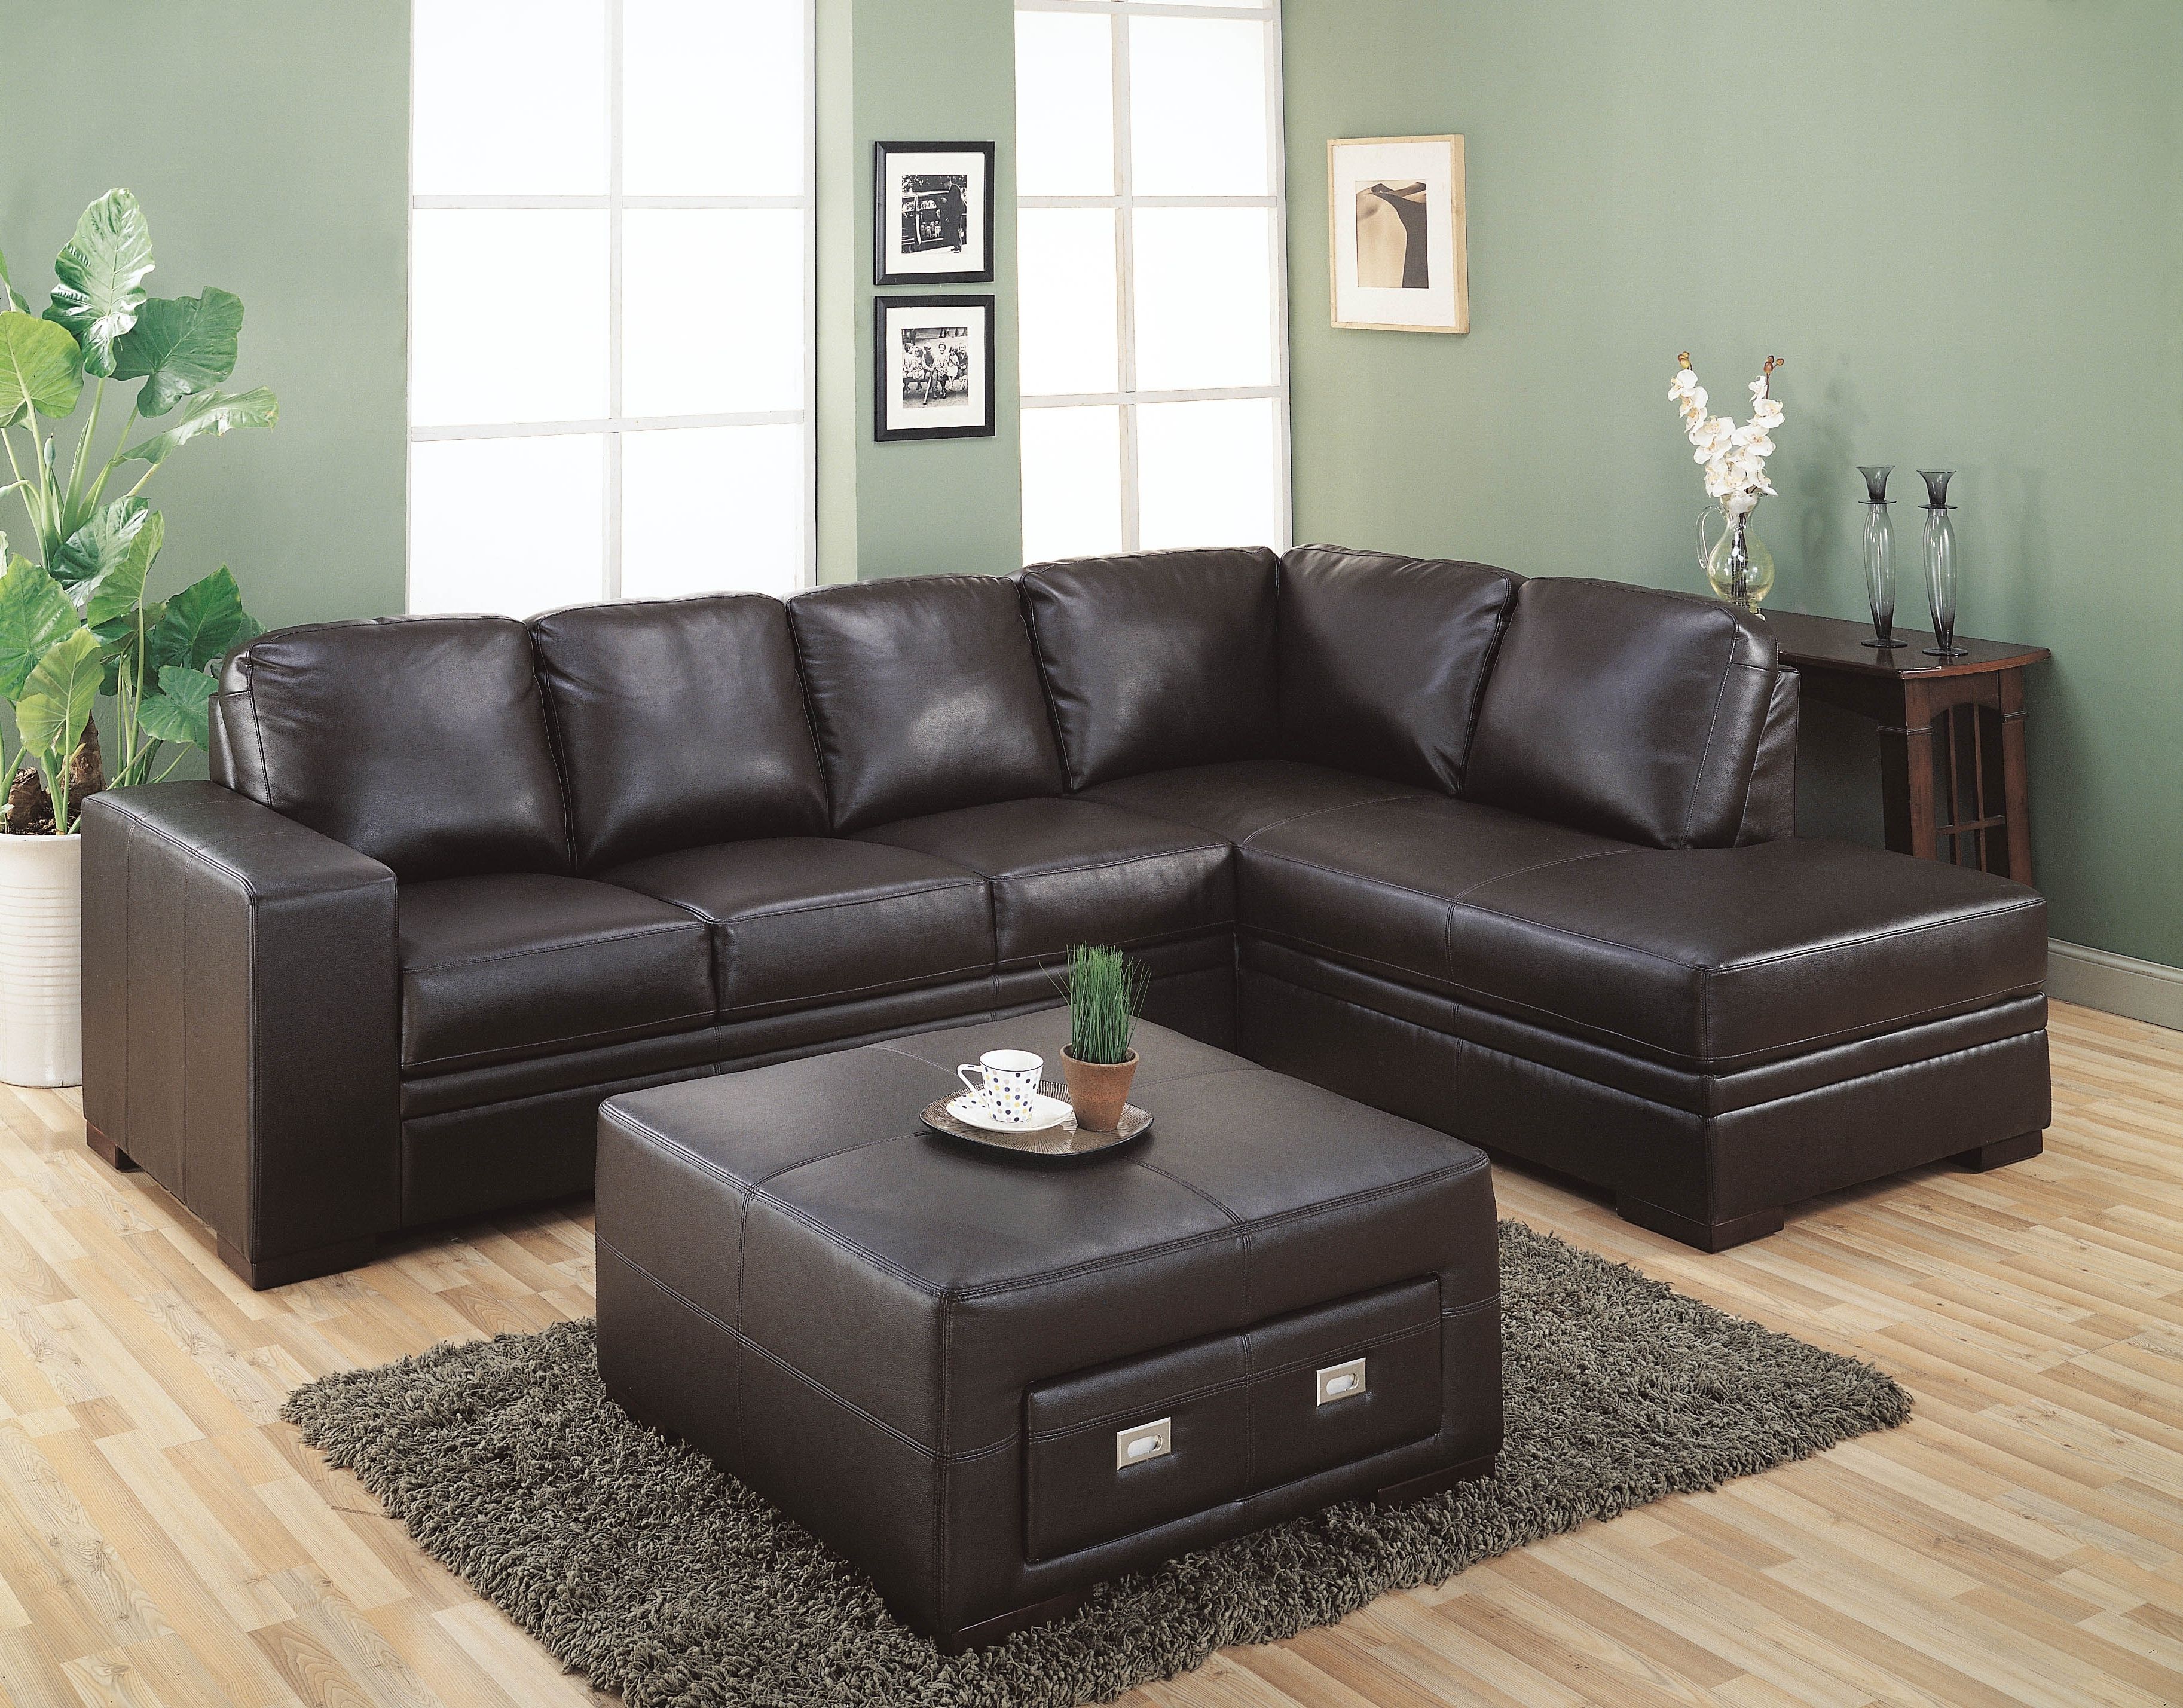 Sofa Leather Sectional Sofas Collection Of Brown Black Couch For Intended For Favorite Memphis Tn Sectional Sofas (View 1 of 15)